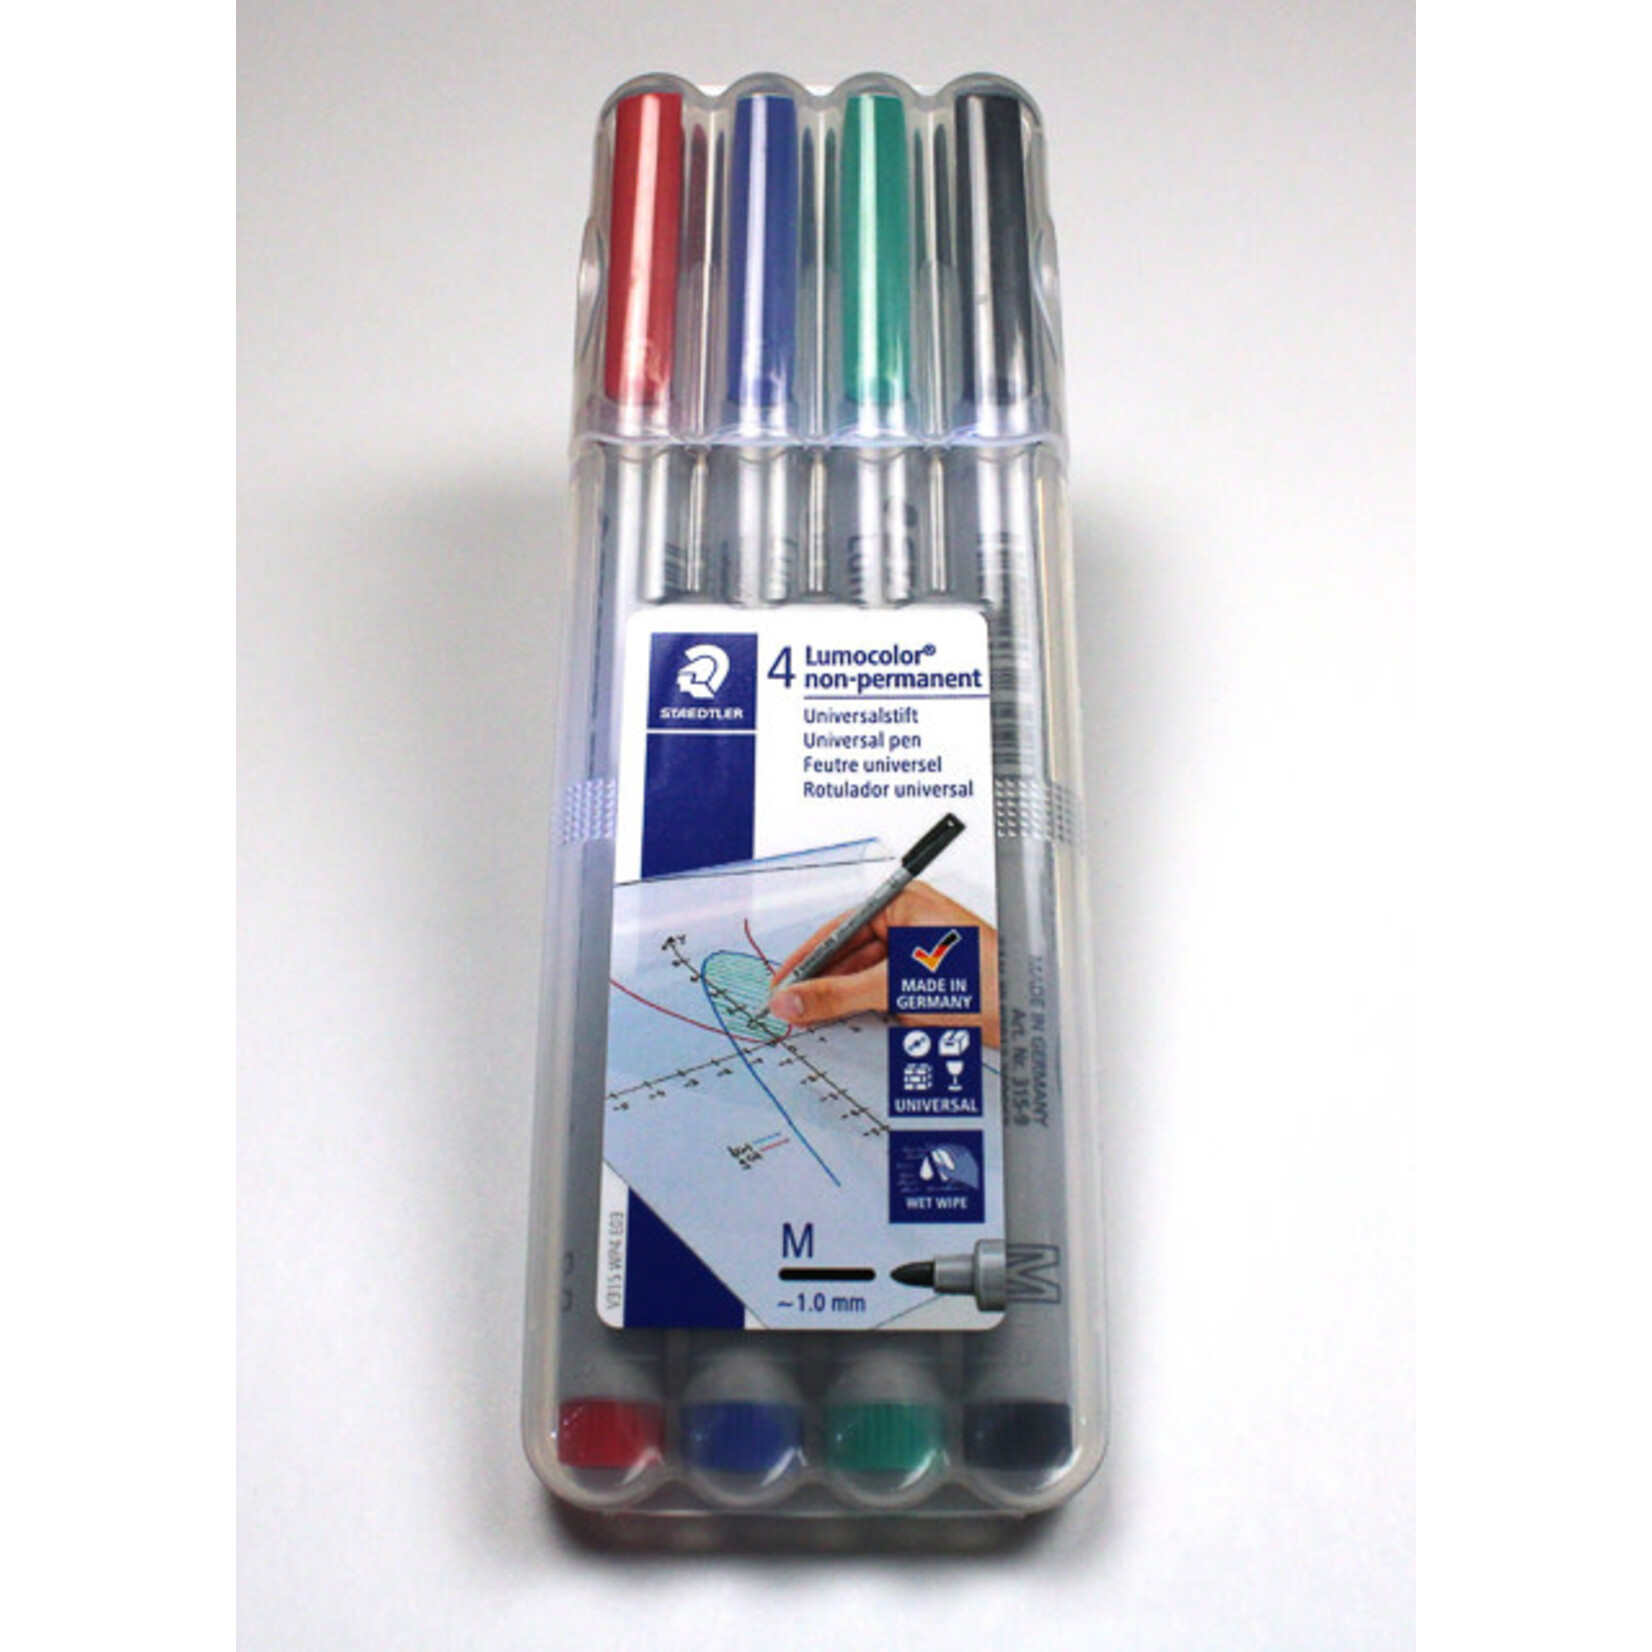 Chessex Water Soluble 4-Pack Markers Medium-Tip (1 each Red, Blue, Green, and Black)